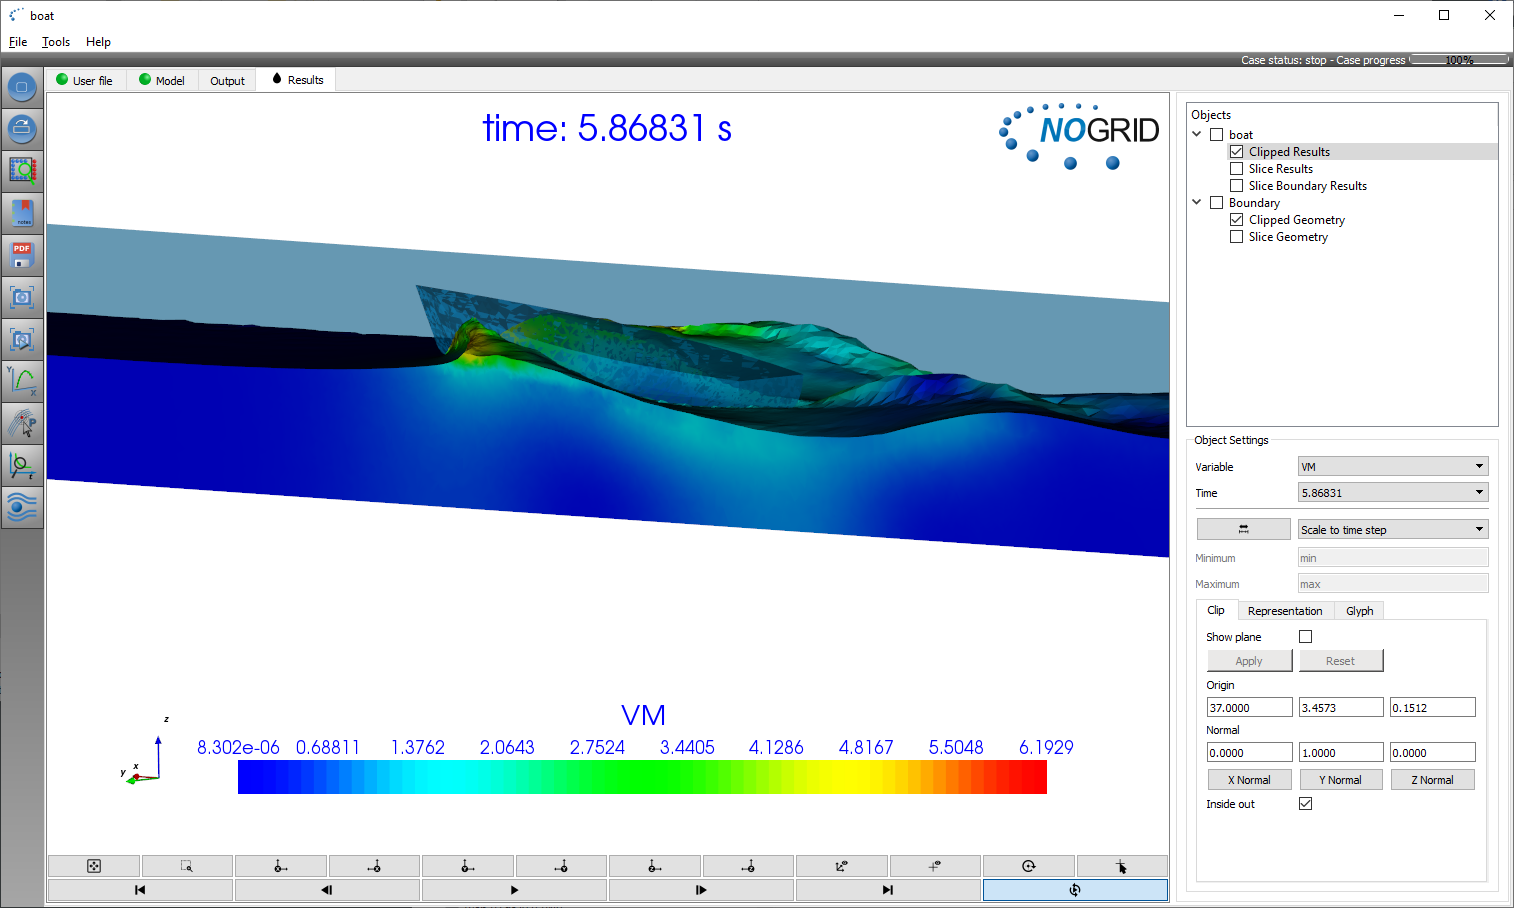 FSI boat on water simulation results in NOGRID points' GUI